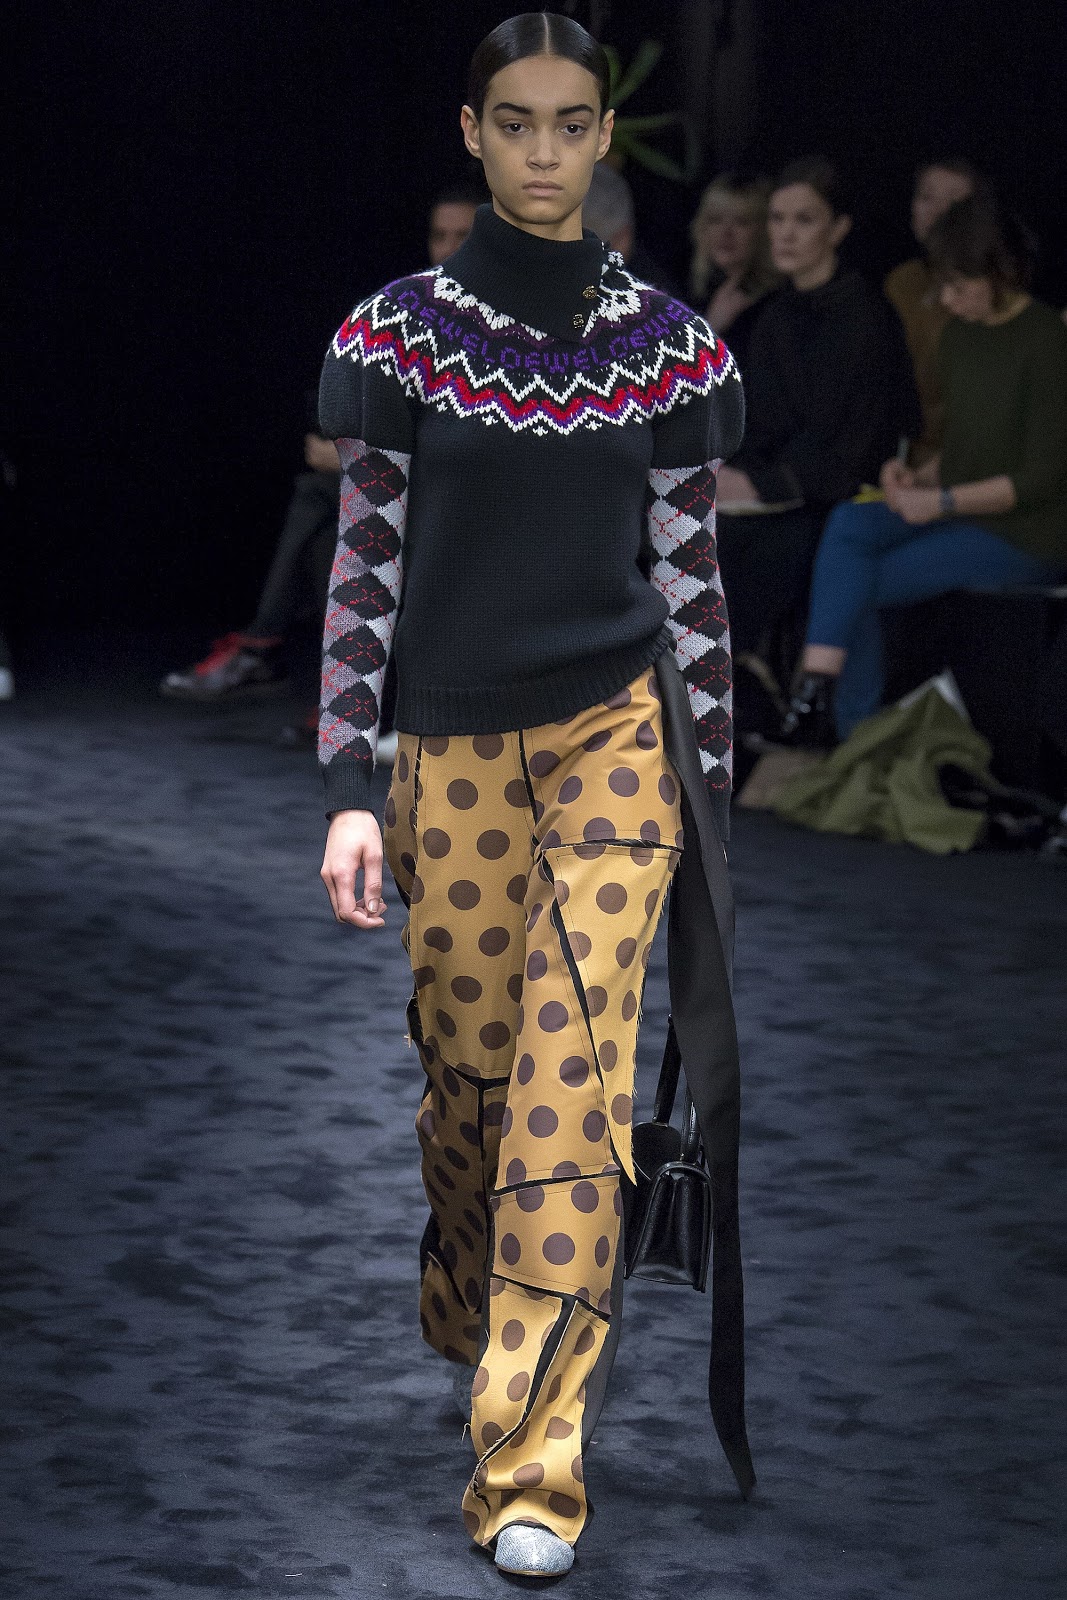 Fashion inspiration : The knitwear from Loewe's AW17 Collection. | Cool ...